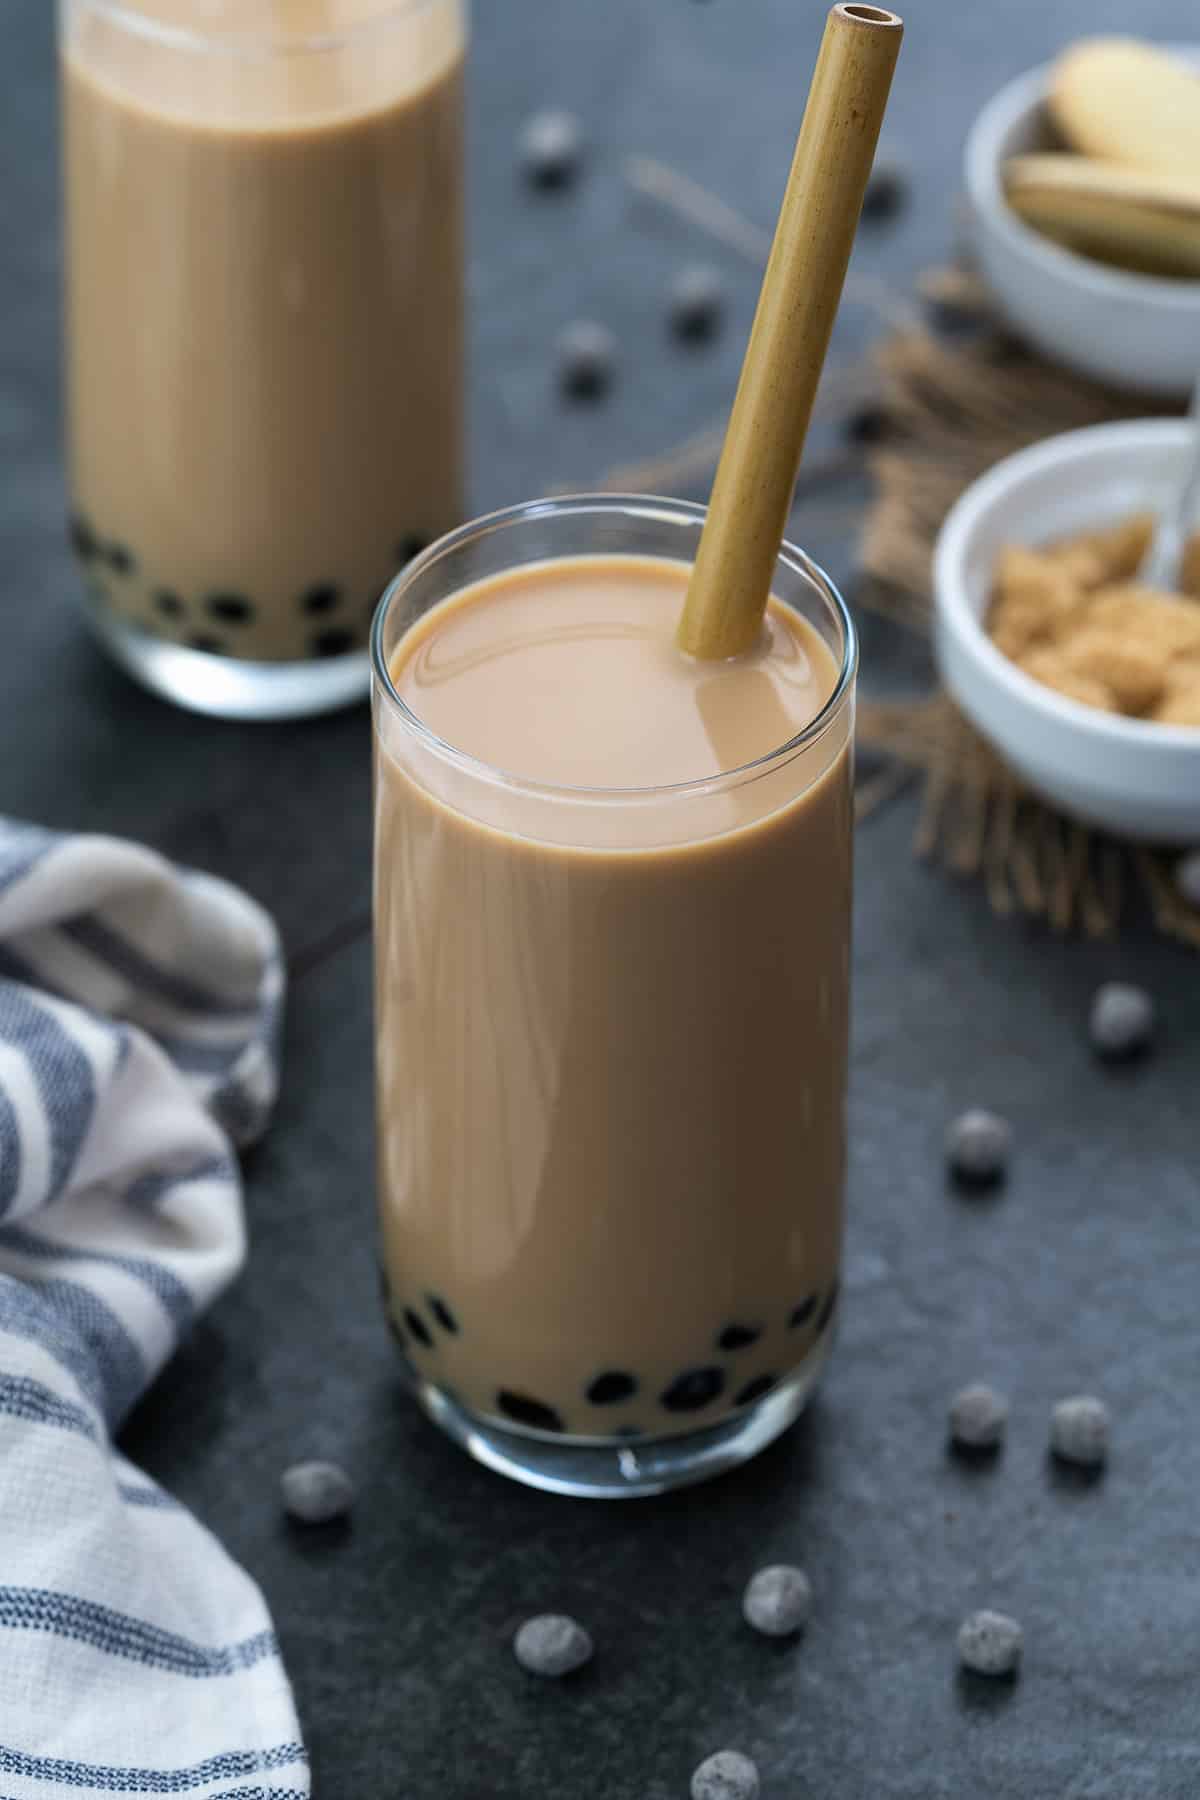 Bubble Tea served in a glass with brown sugar placed in a bowl.